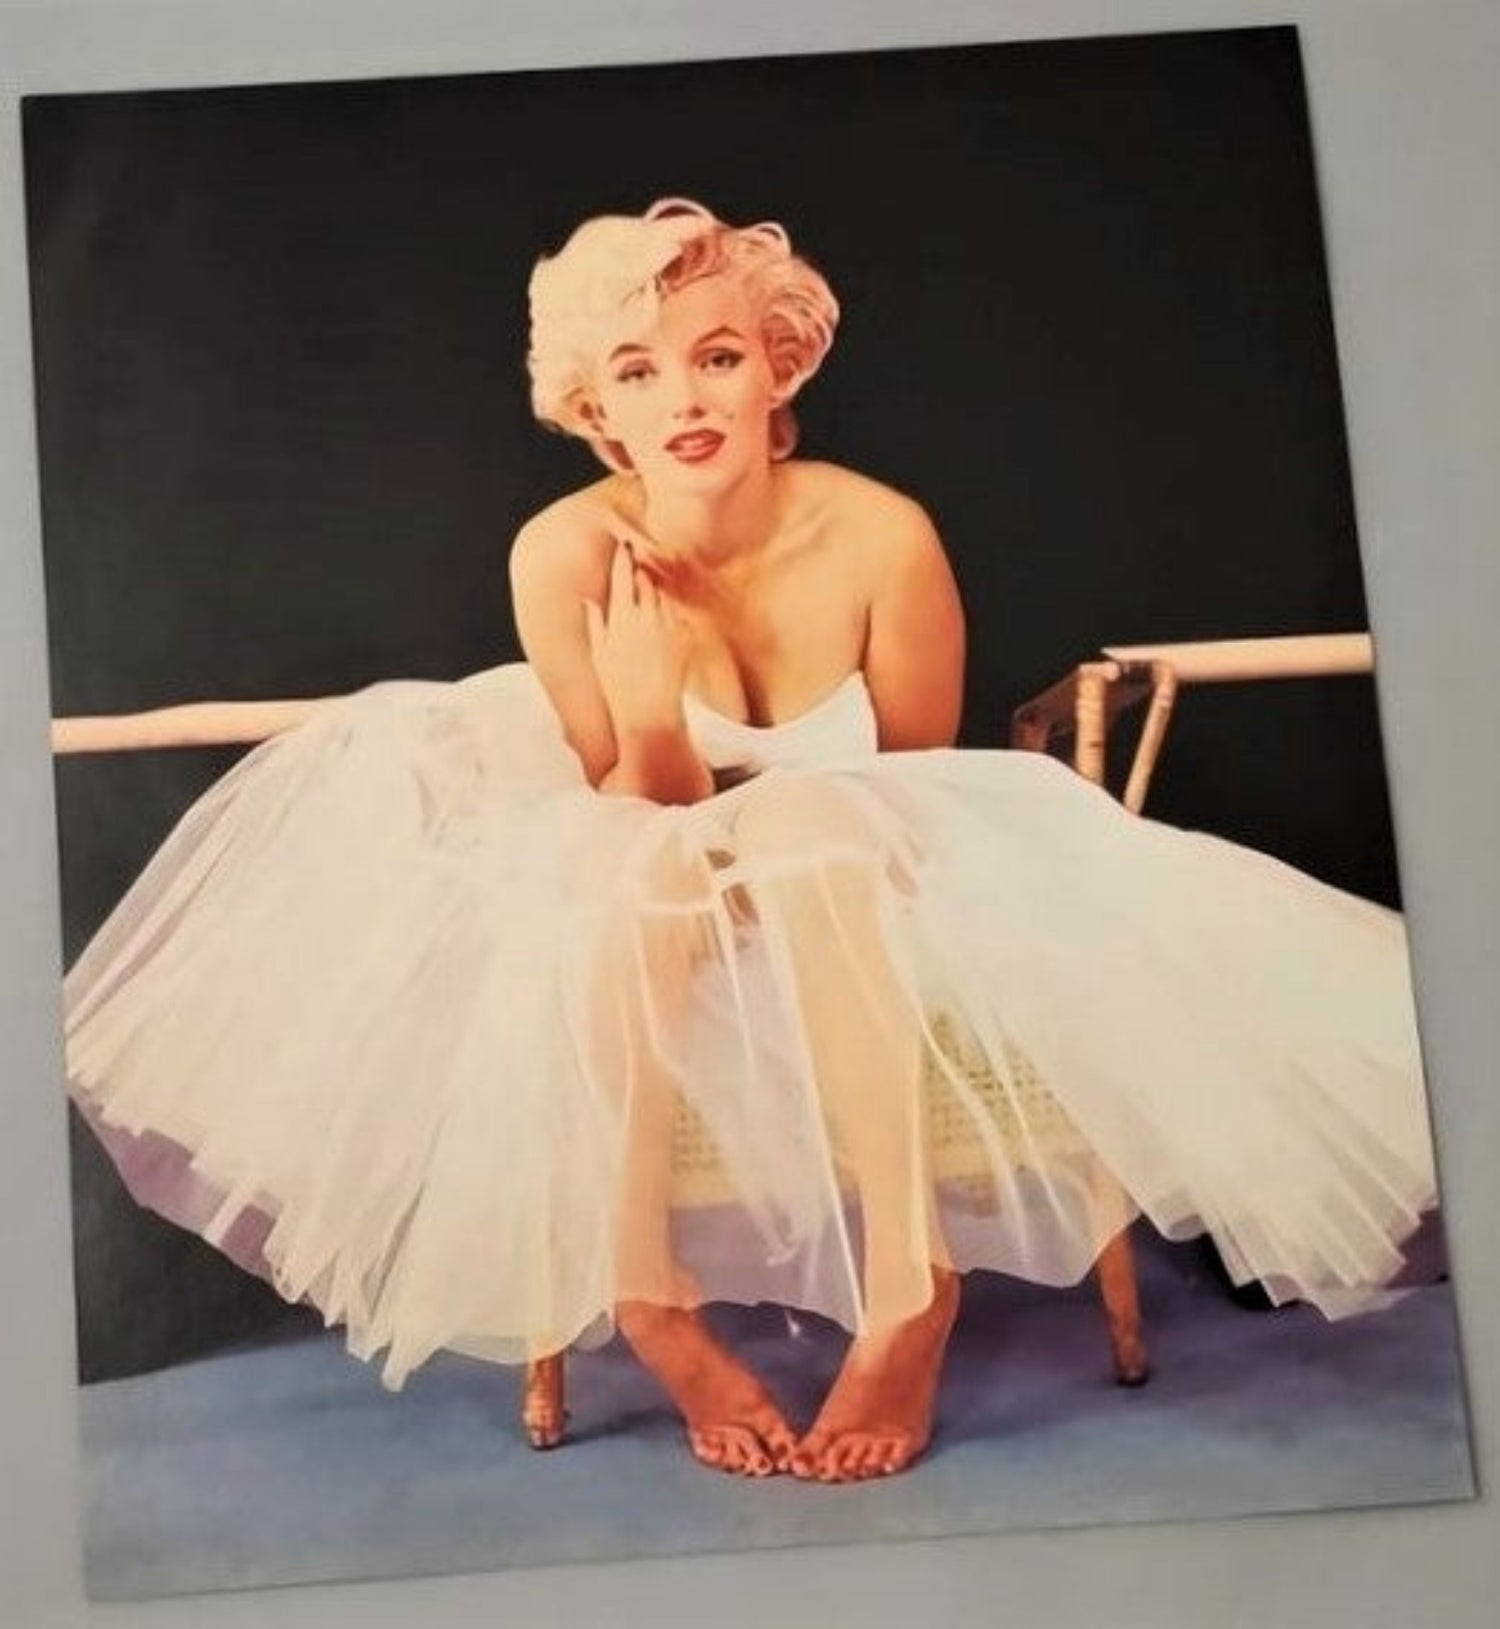 Marilyn Monroe Ballerina Sitting Photograph For Sale In AREA51GALLERY New Orleans